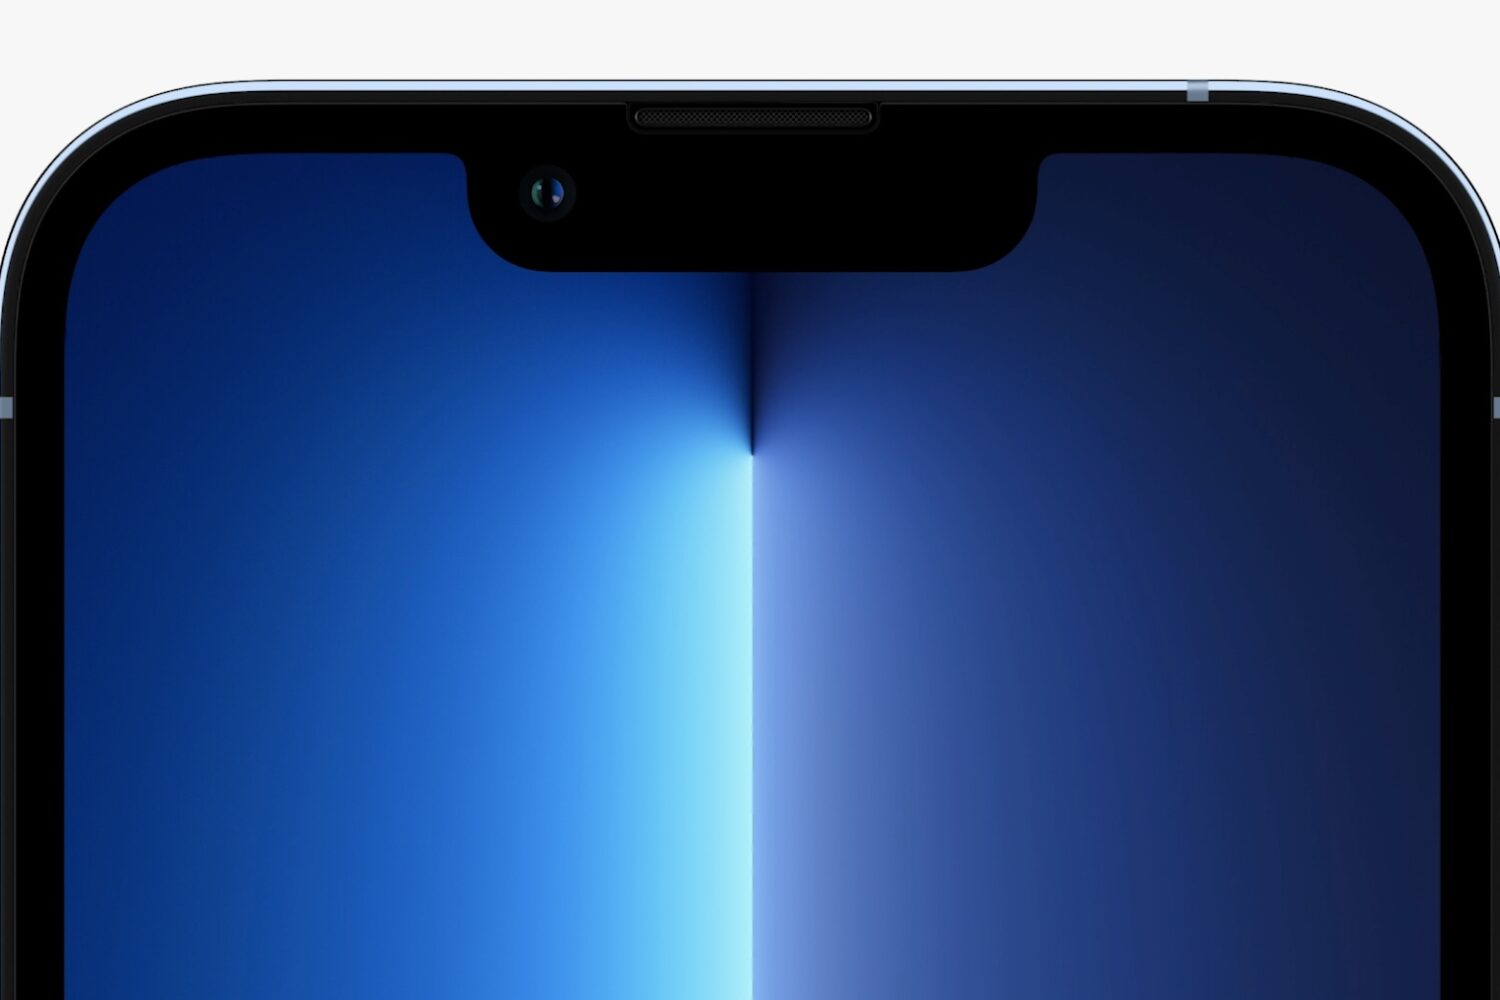 Apple's marketing image illustrating a smaller notch on the iPhone 13 Pro